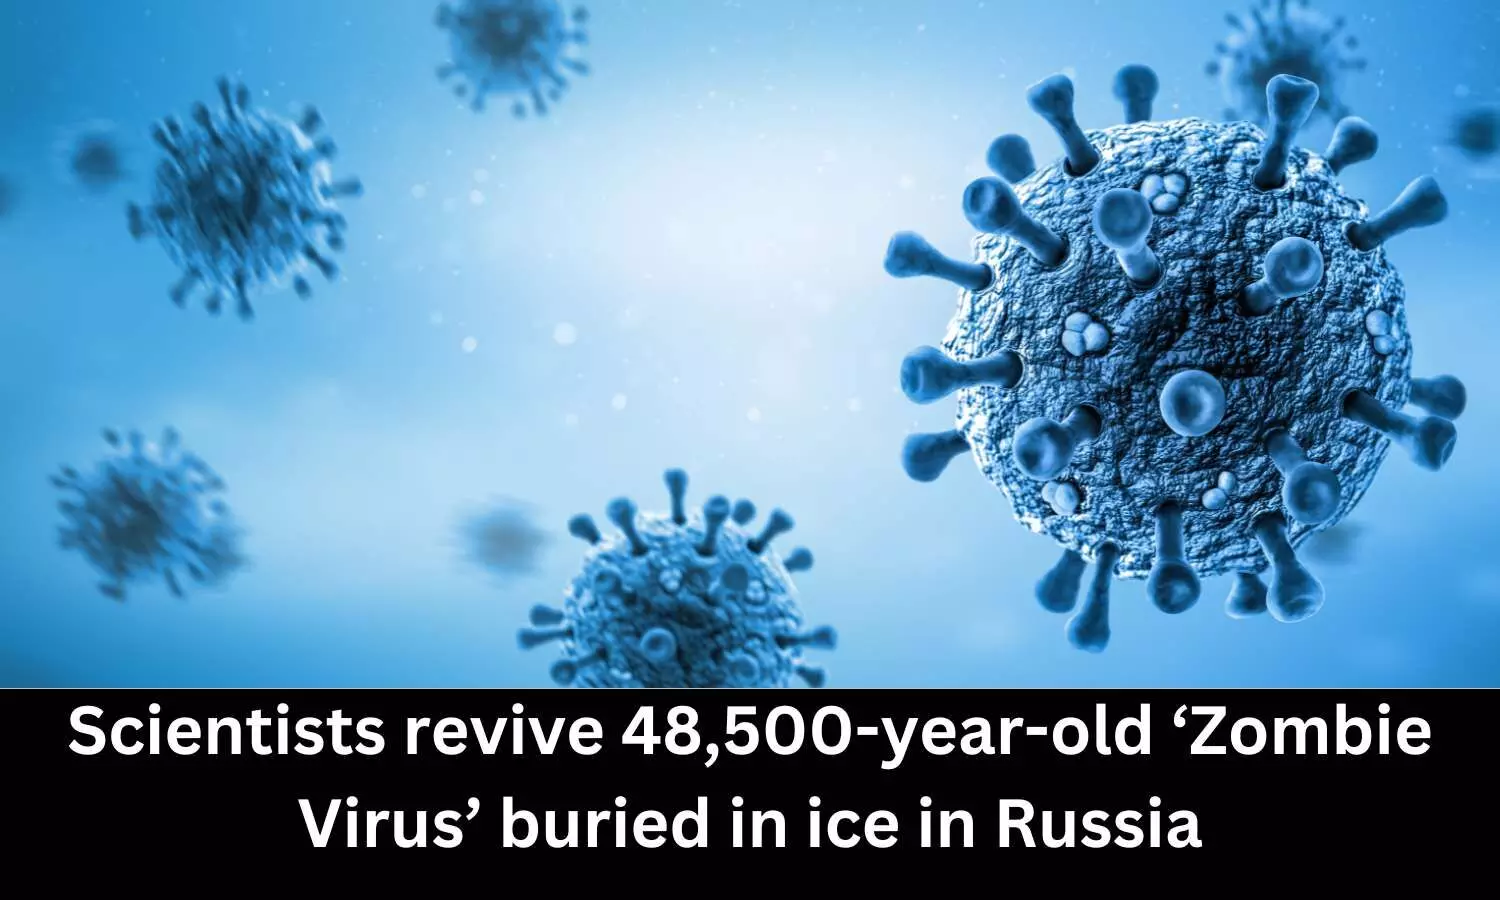 Scientists revive 48,500-year-old Zombie Virus buried in ice in Russia